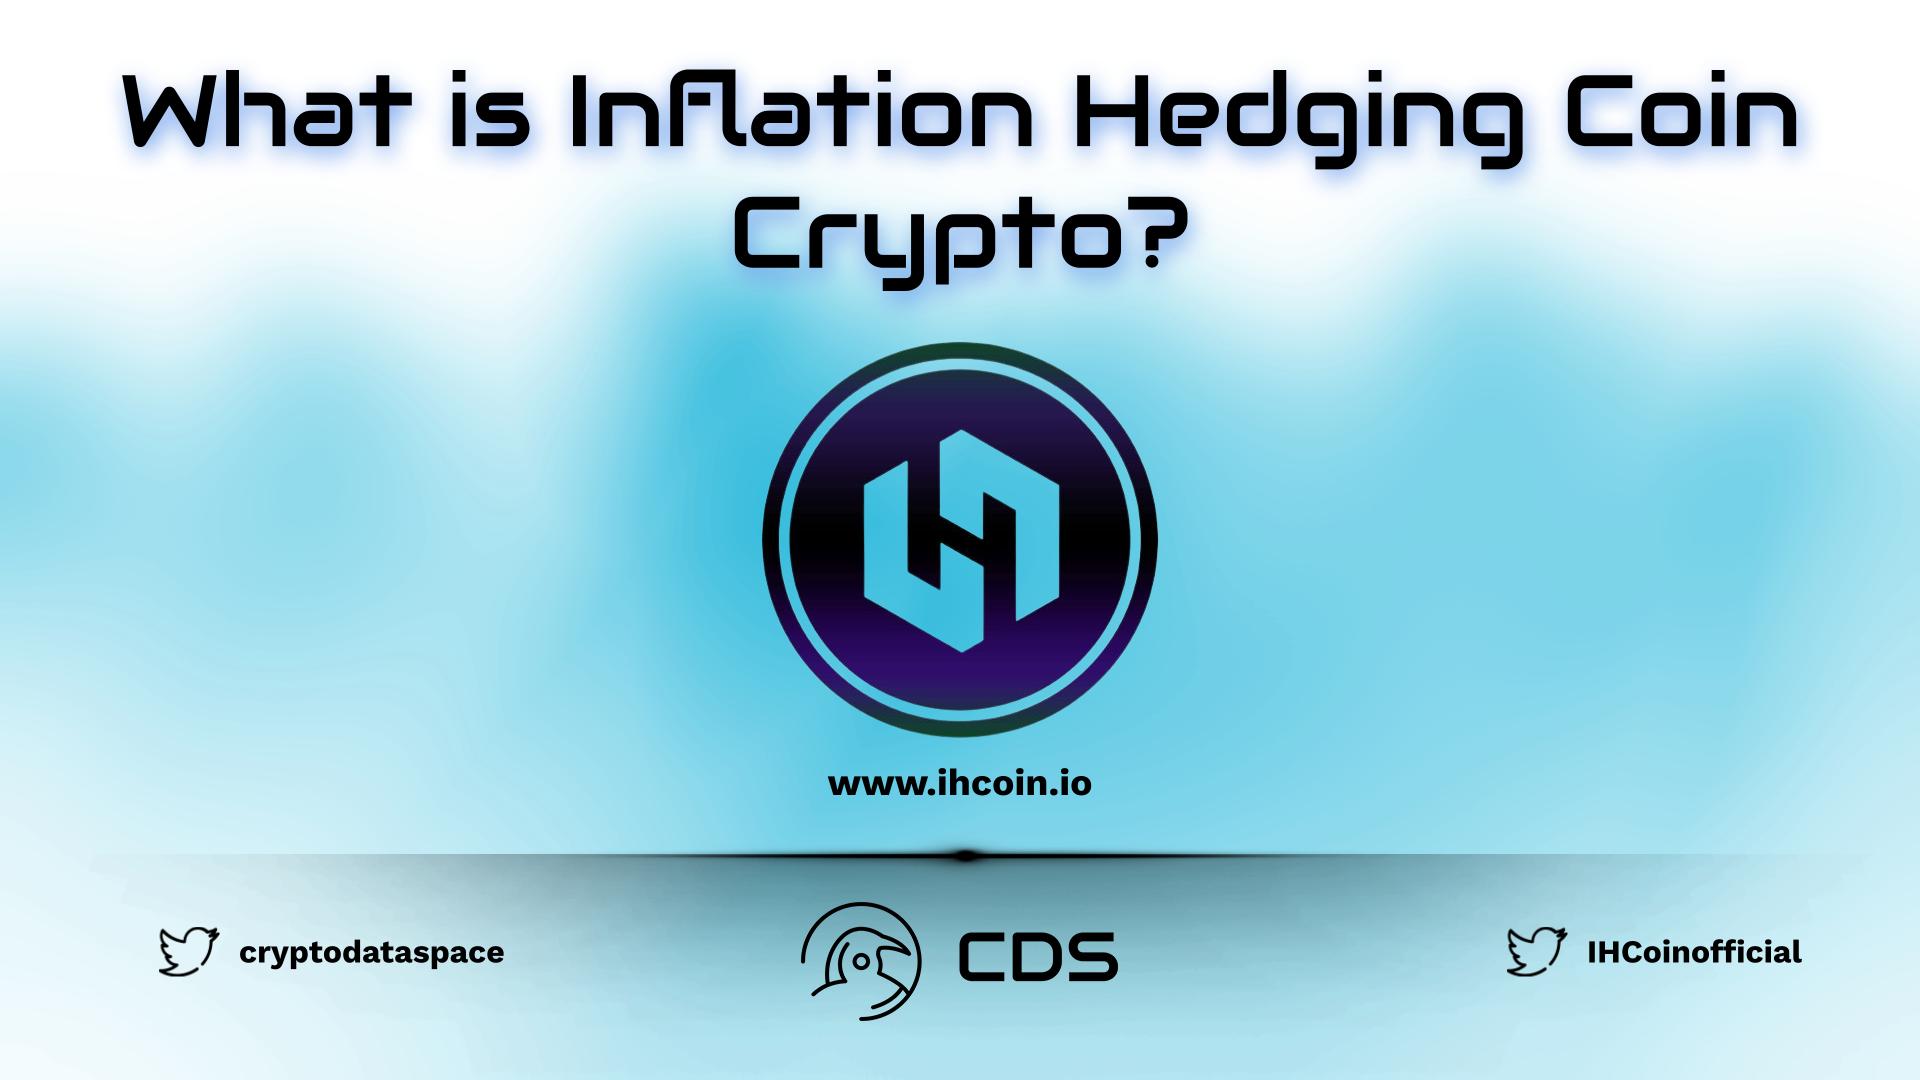 What is Inflation Hedging Coin (IHC)?